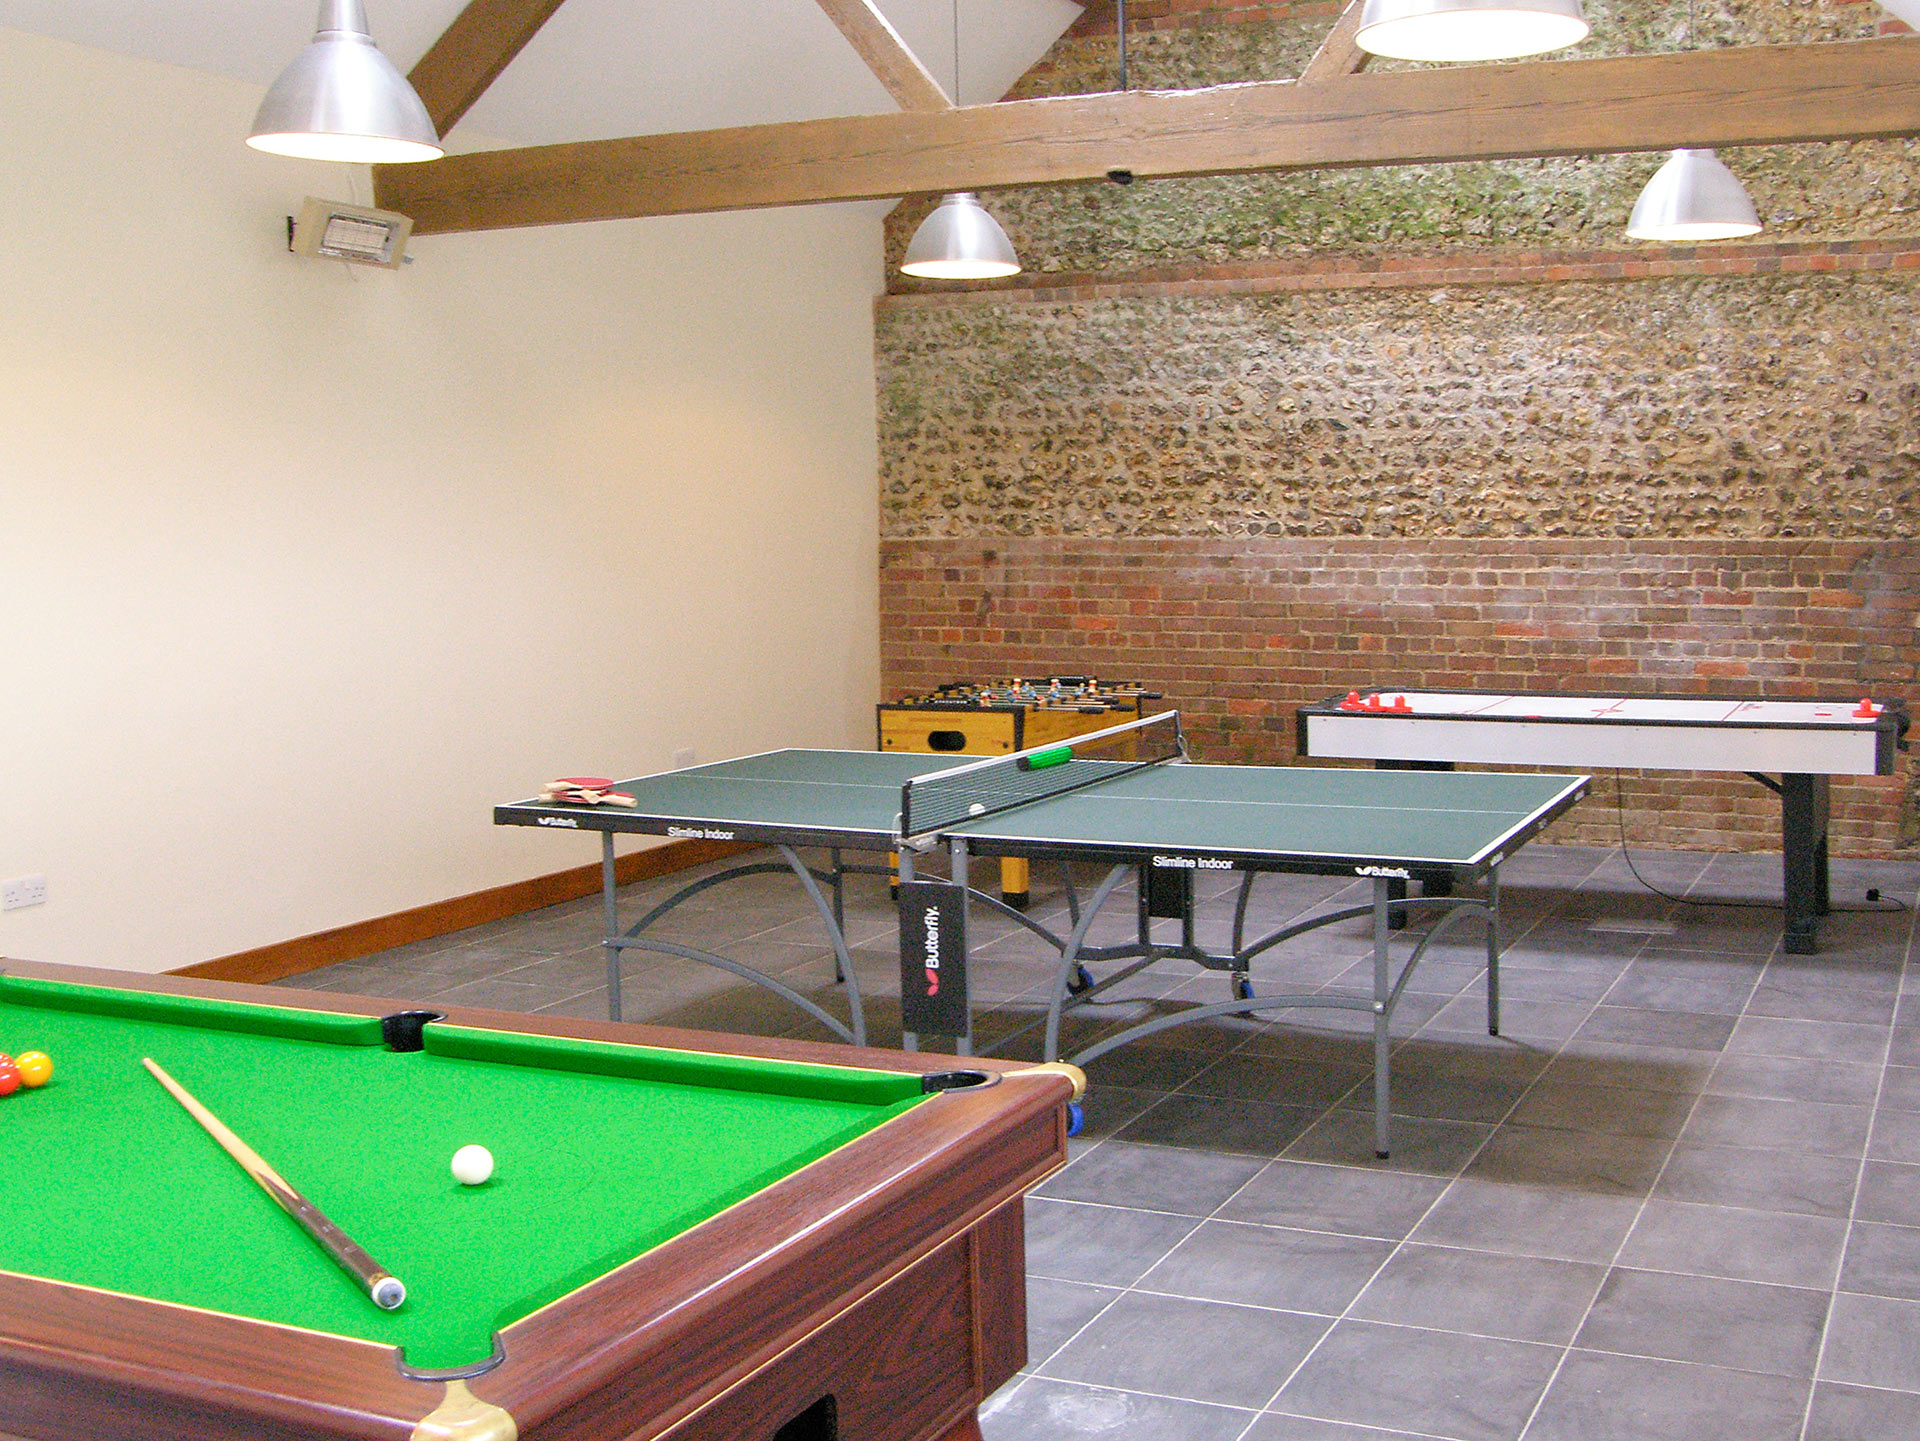 Interior games room of barn conversion with feature brick and stone wall and exposed beams